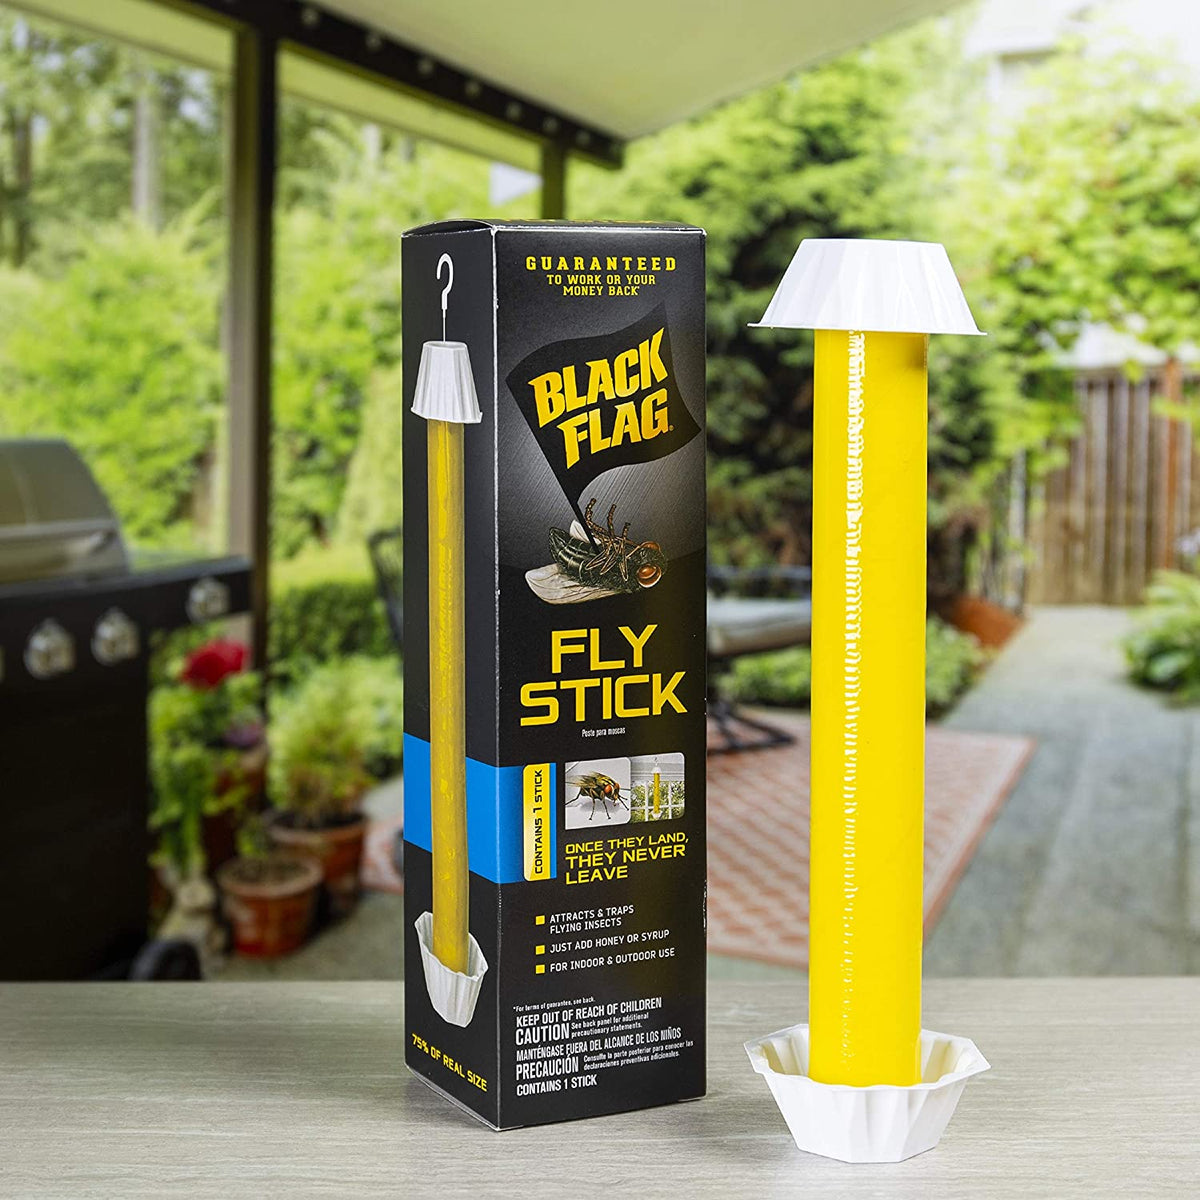 Black Flag HG-11015 Fly Stick Insect Trap